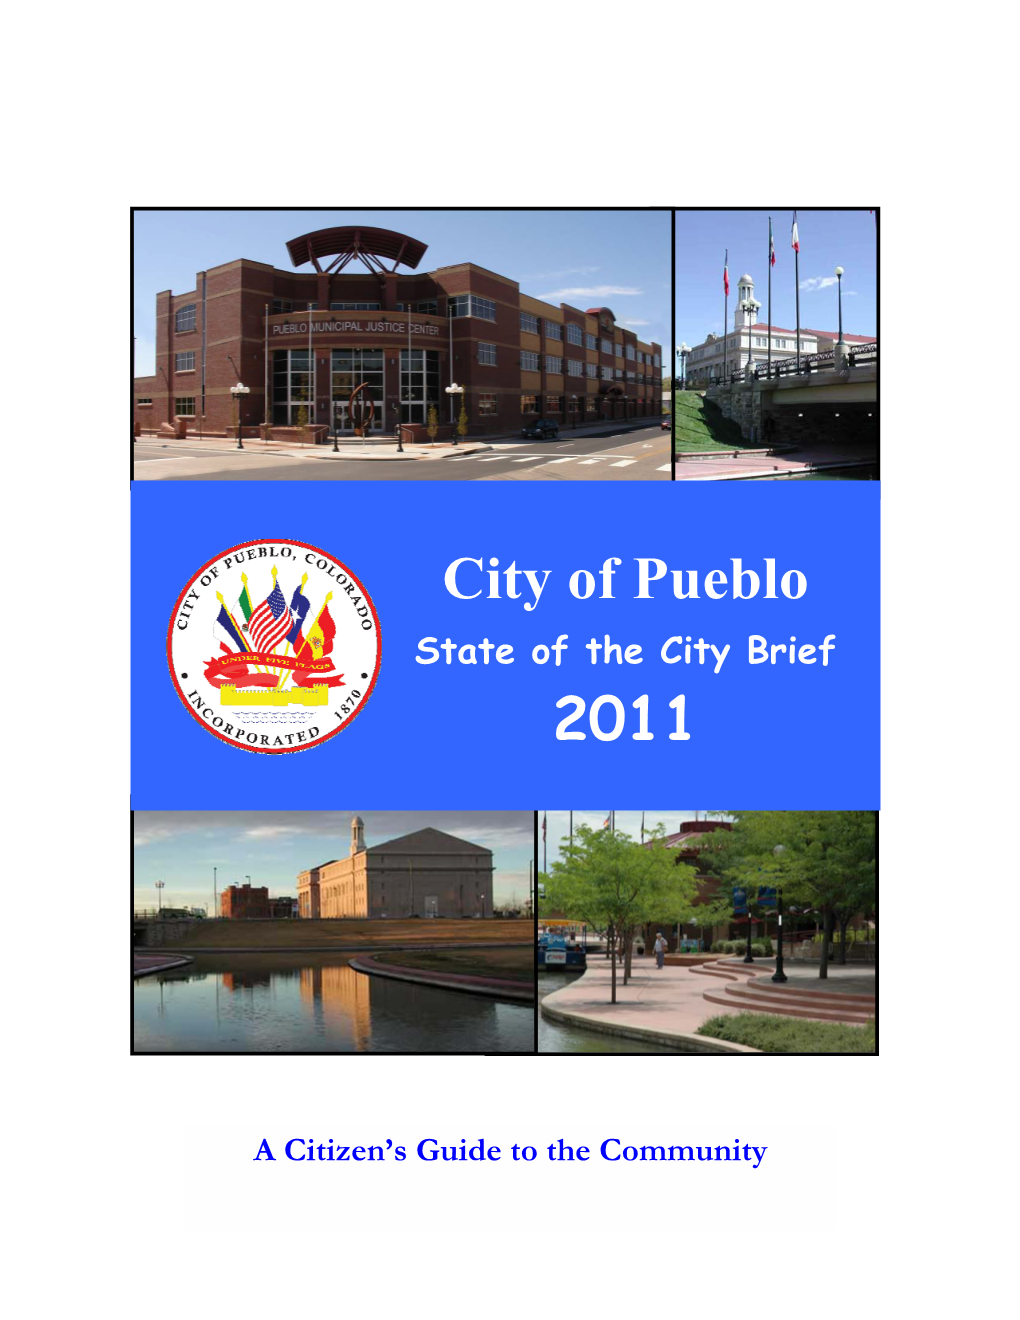 2011 State of the City Brief Introduction